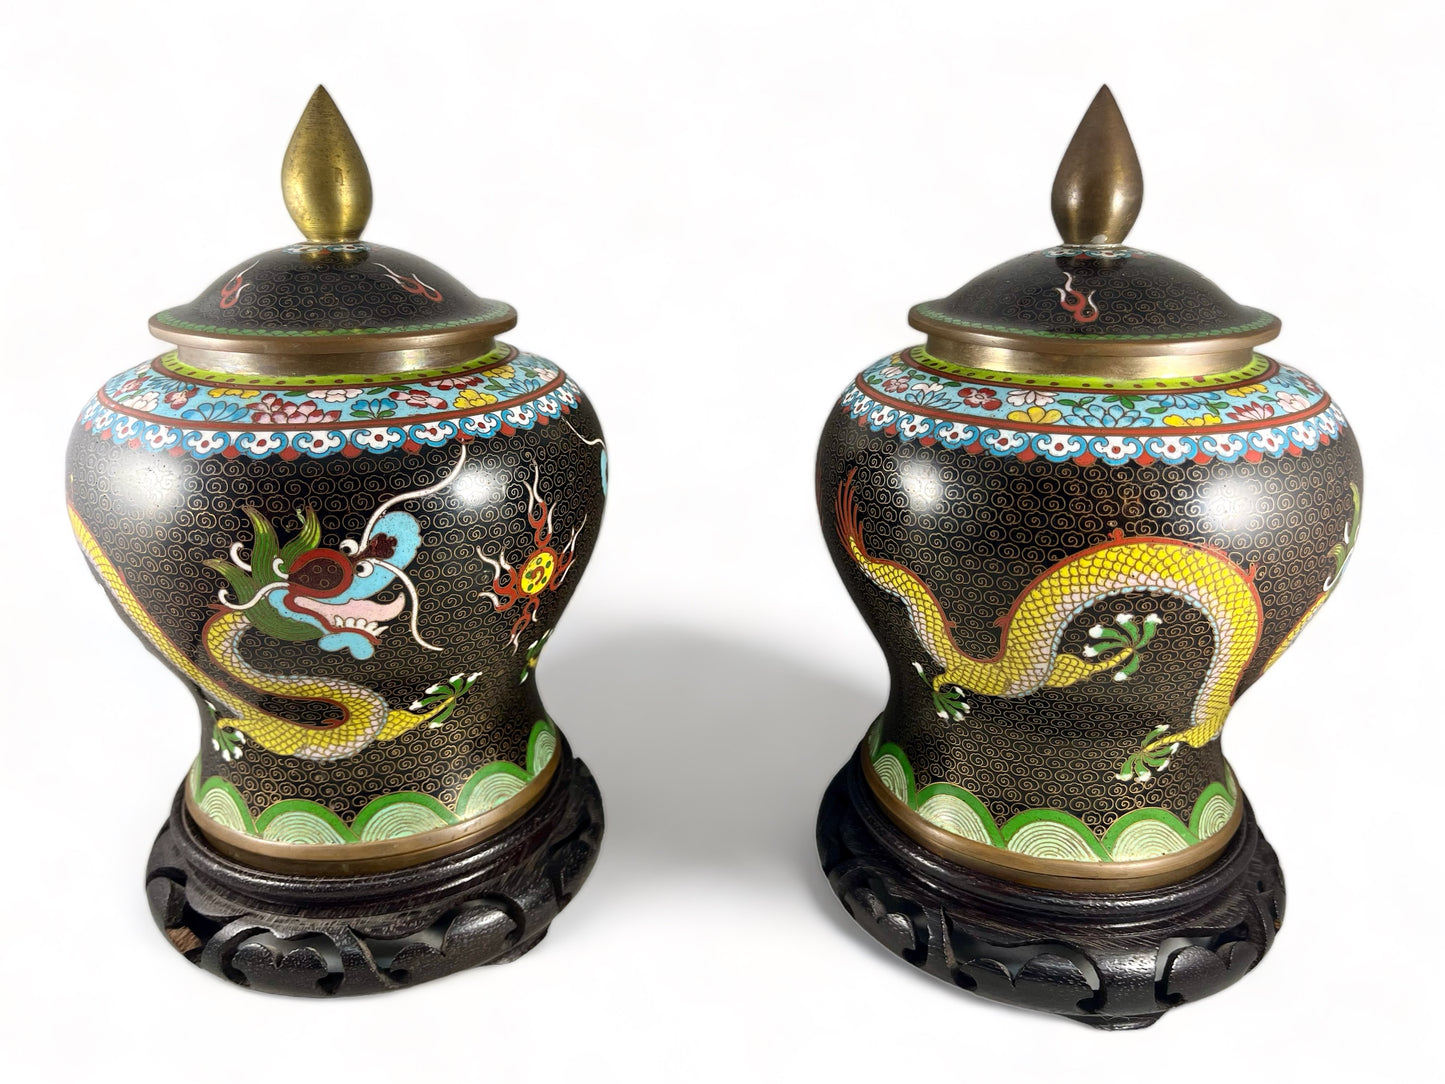 Pair of Chinese cloisonne lidded urns circa 1920